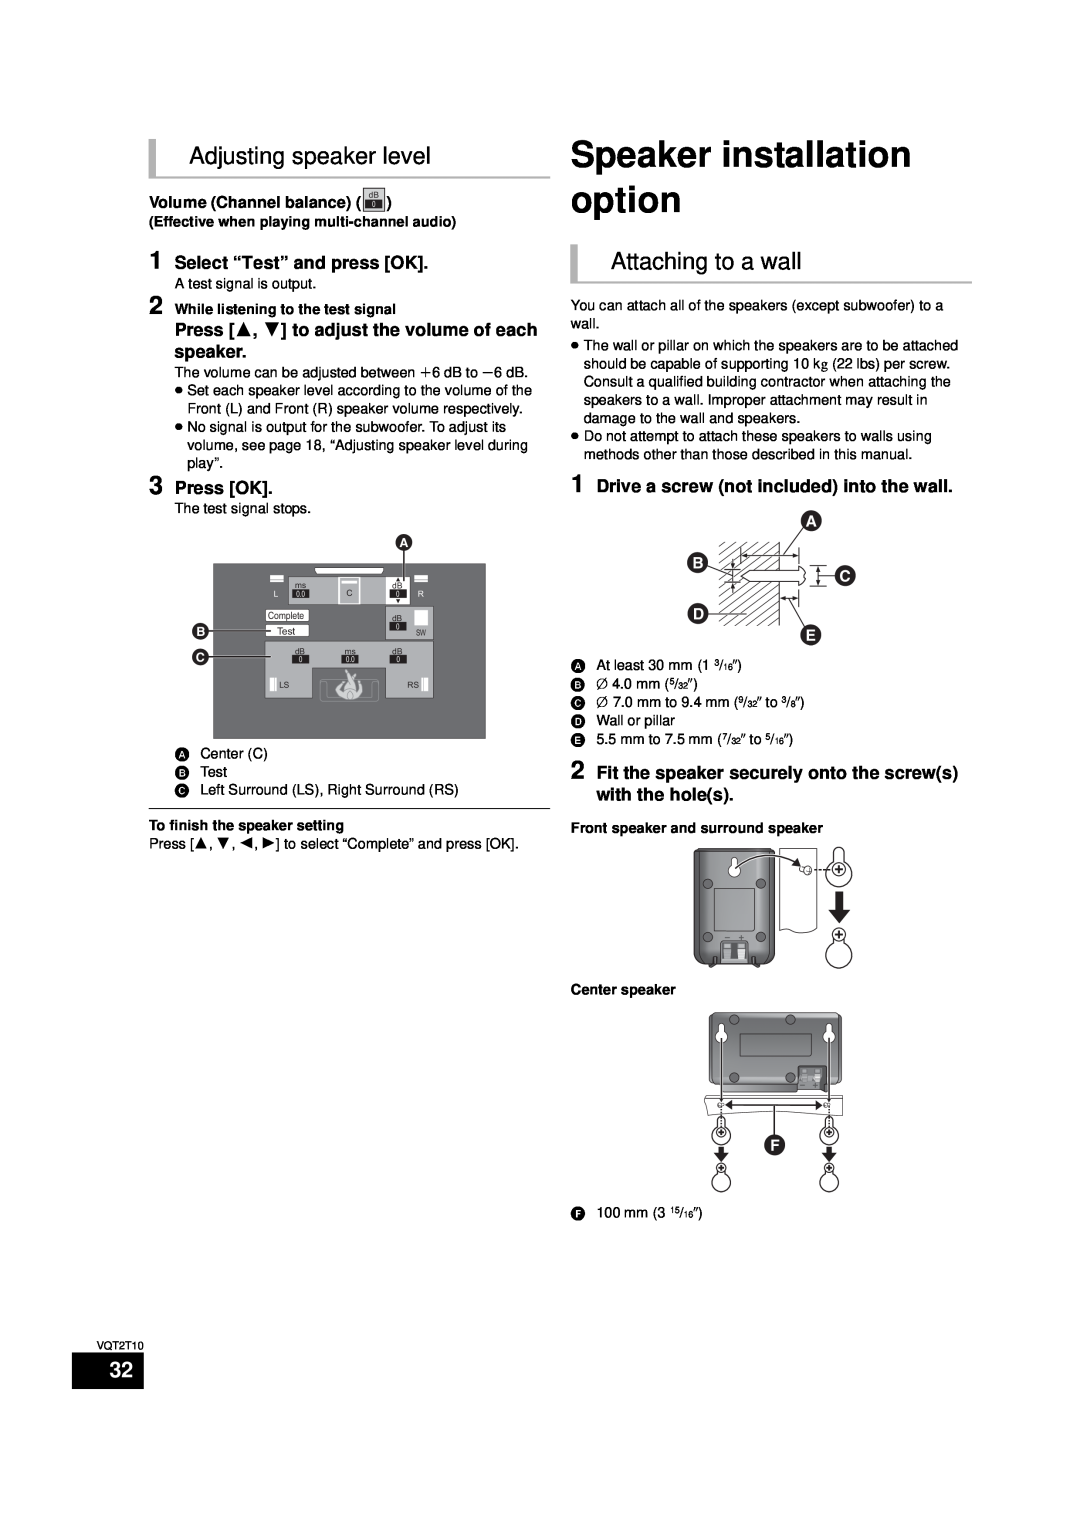 Panasonic SC-BT228 Speaker installation option, Adjusting speaker level, Attaching to a wall, Select “Test” and press OK 